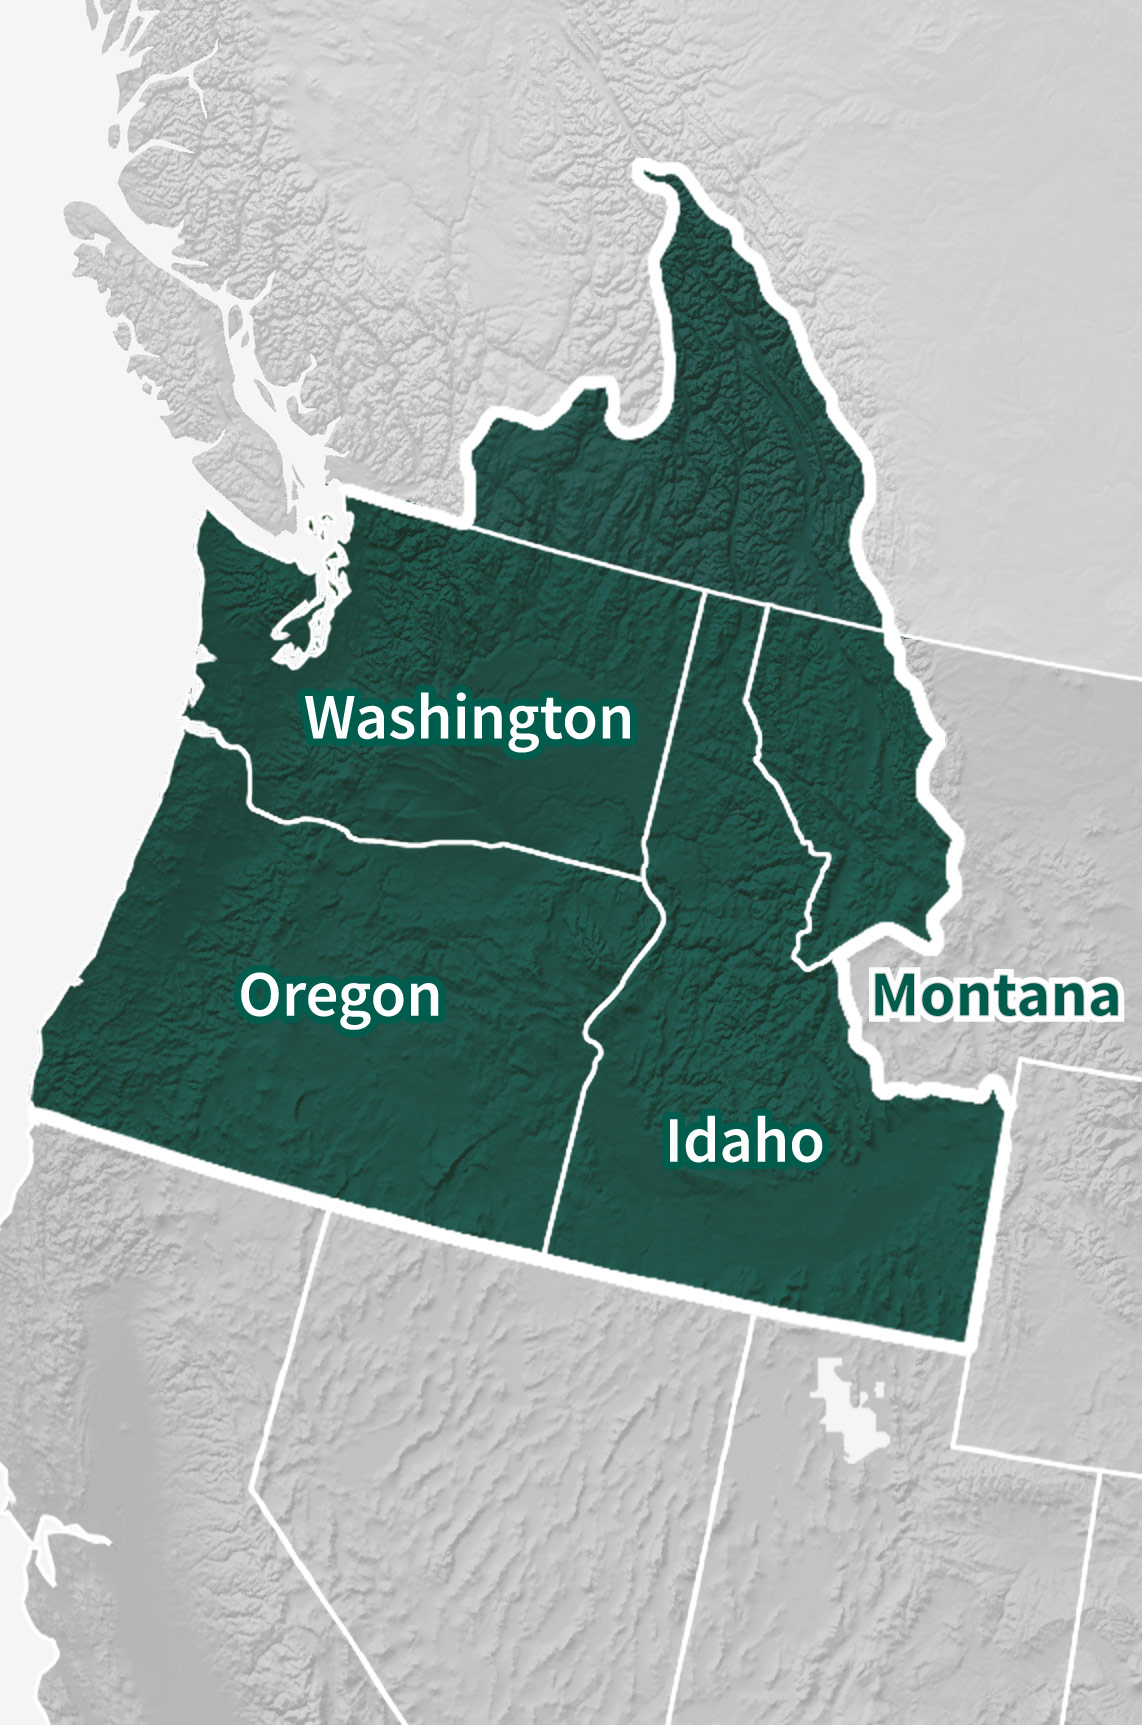 Map of the Pacific Northwest DEWS region, which includes Idaho, Oregon, Washington, and part of Montana